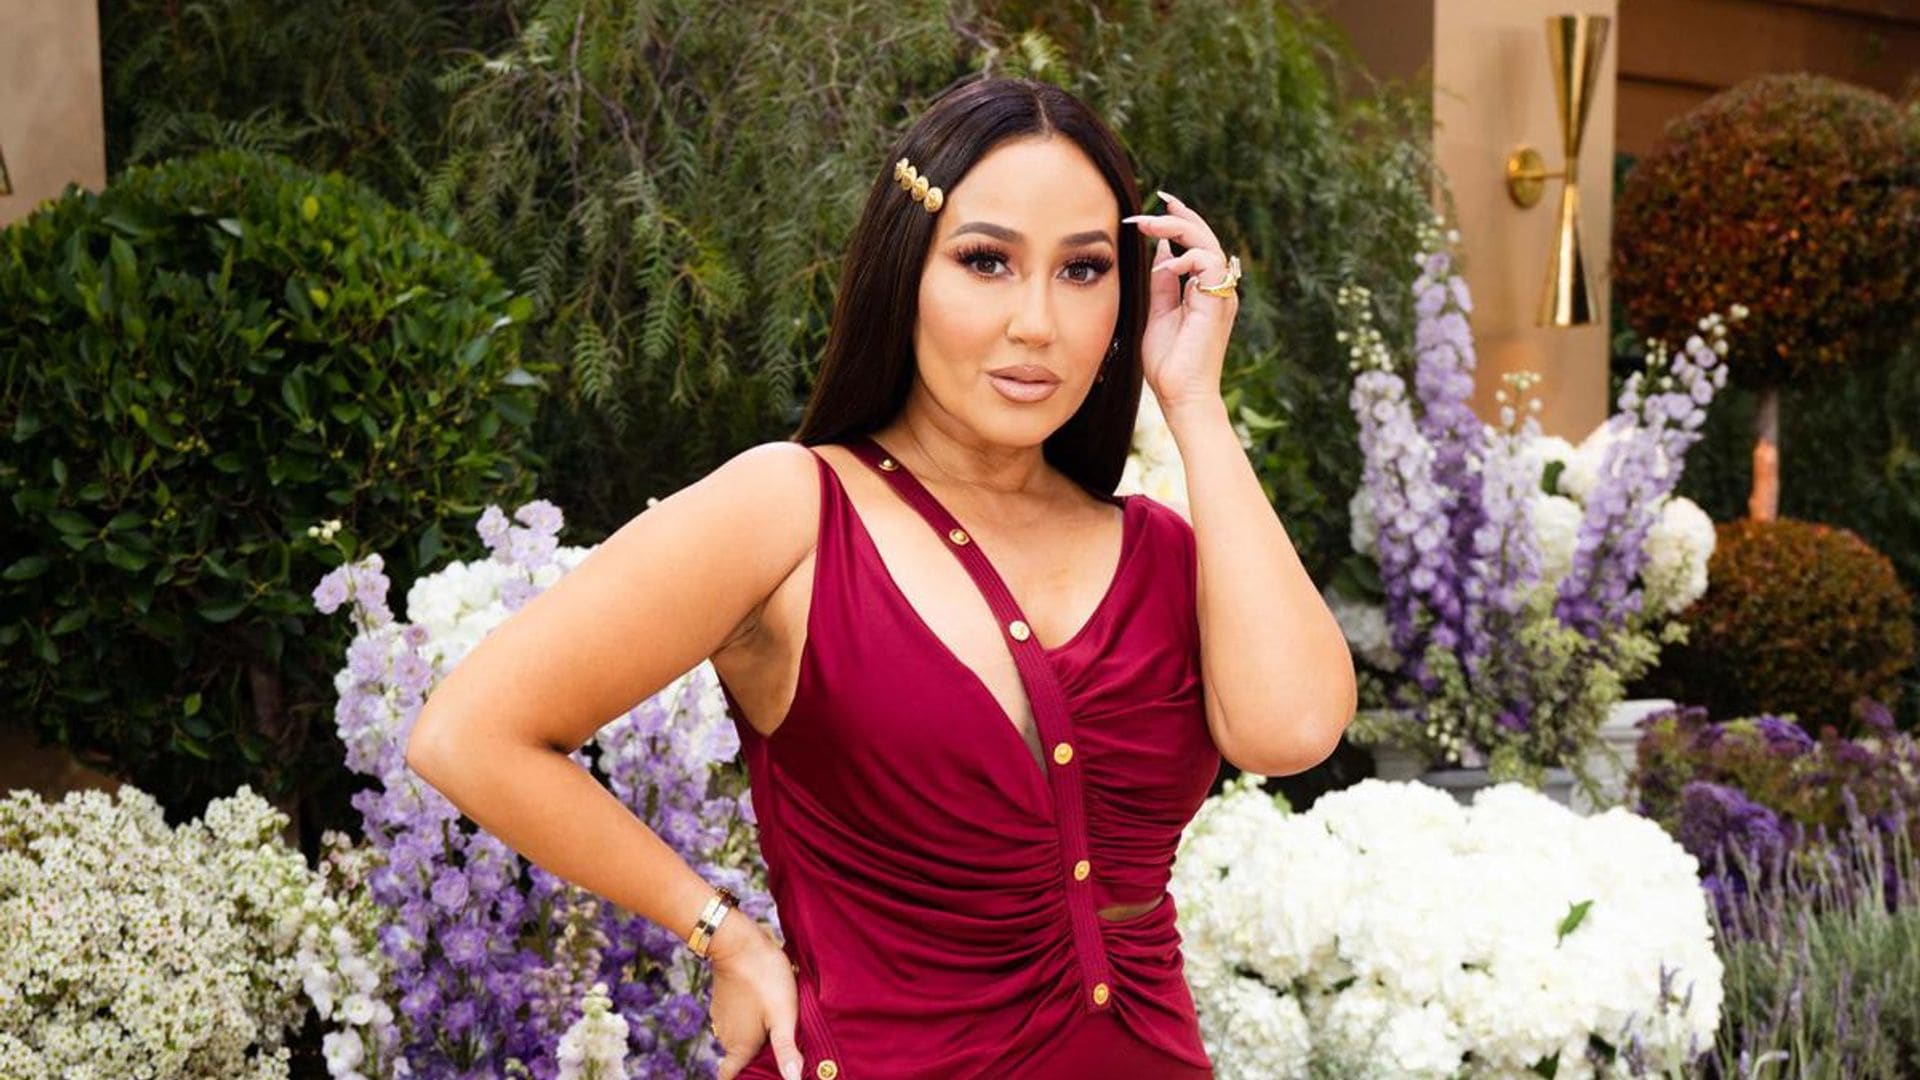 Adrienne Bailon-Houghton reveals she co-sleeps with her son, and he doesn’t have a bedroom